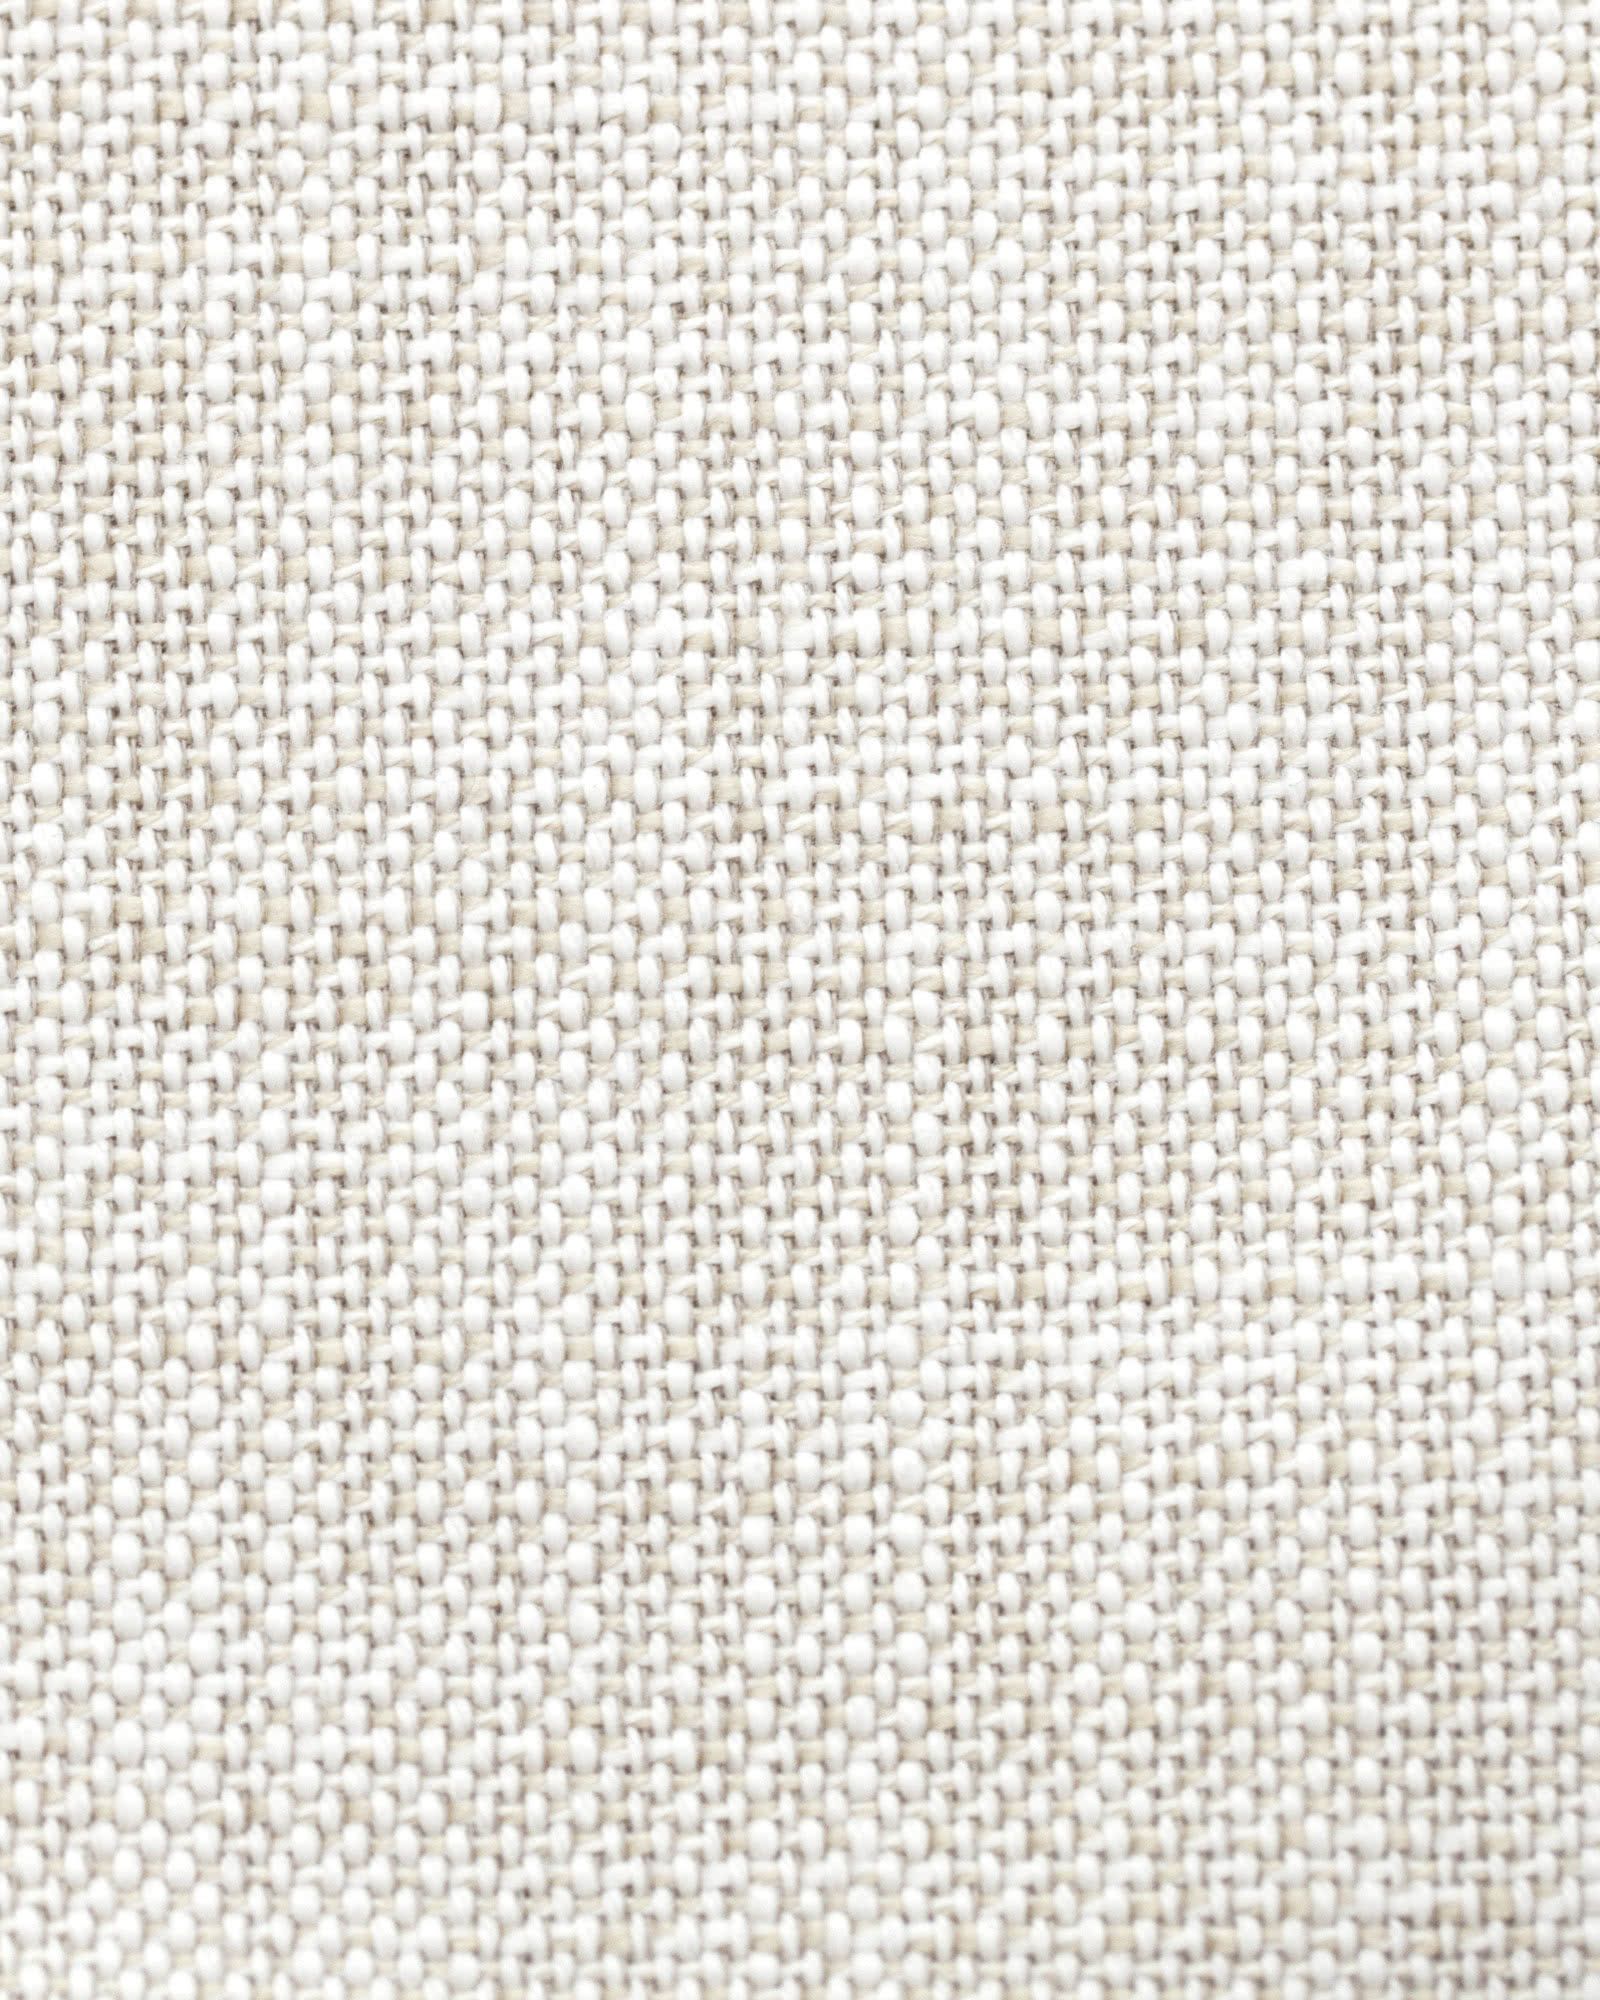 Fabric by the Yard – Perennials® Basketweave Fabric | Serena and Lily